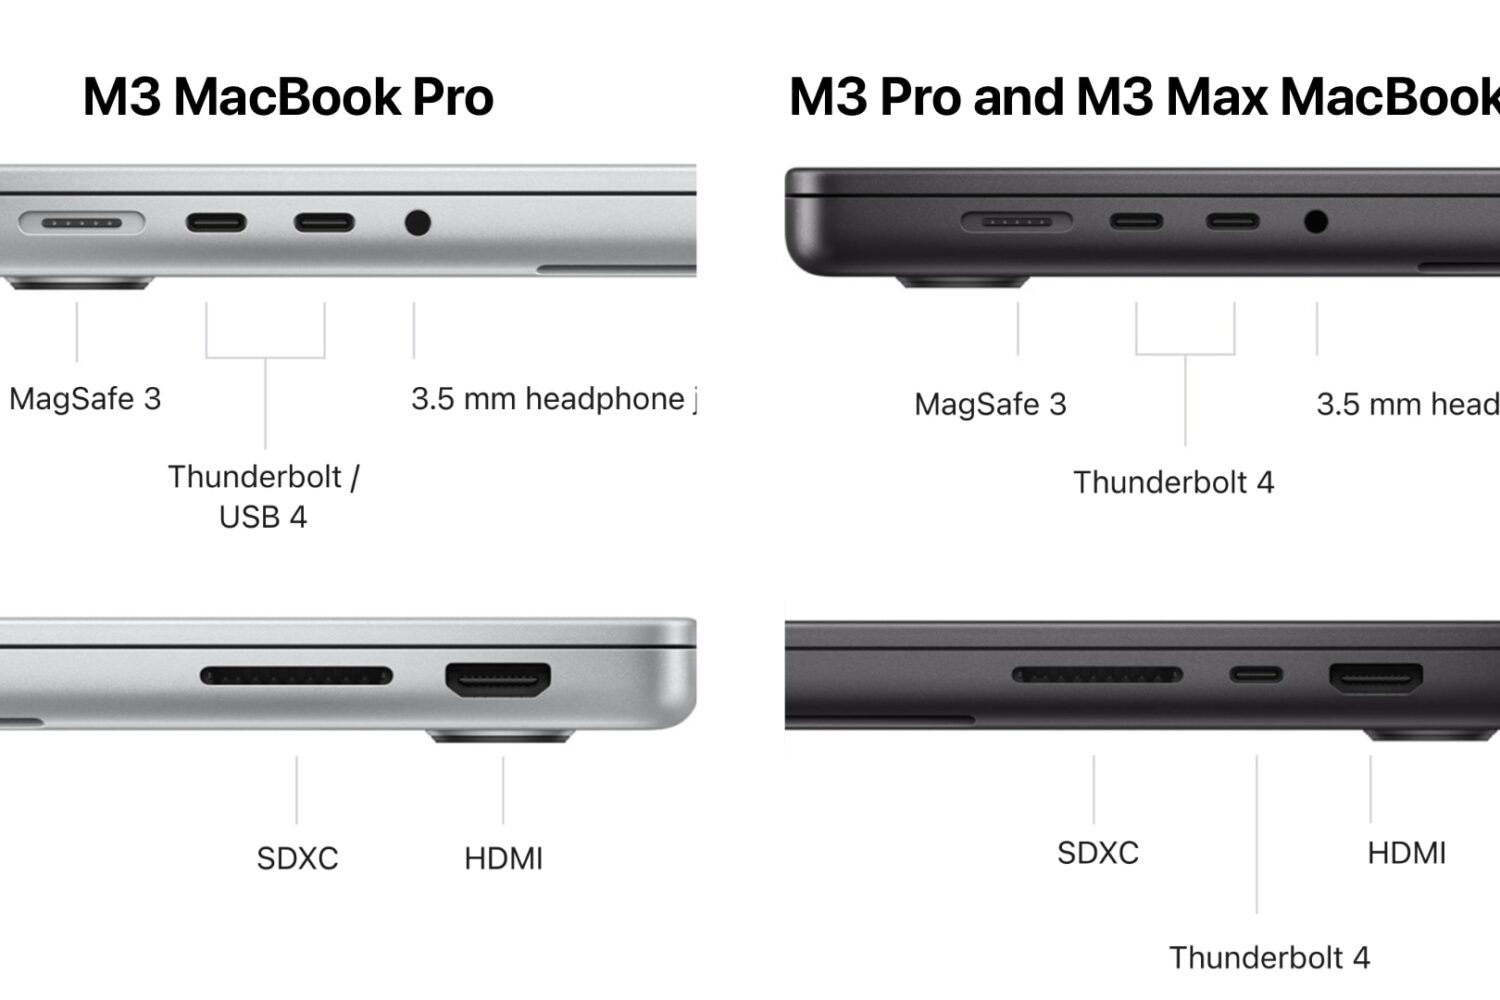 Side ports on the M3, M3 Pro and M3 Max MacBook Pro